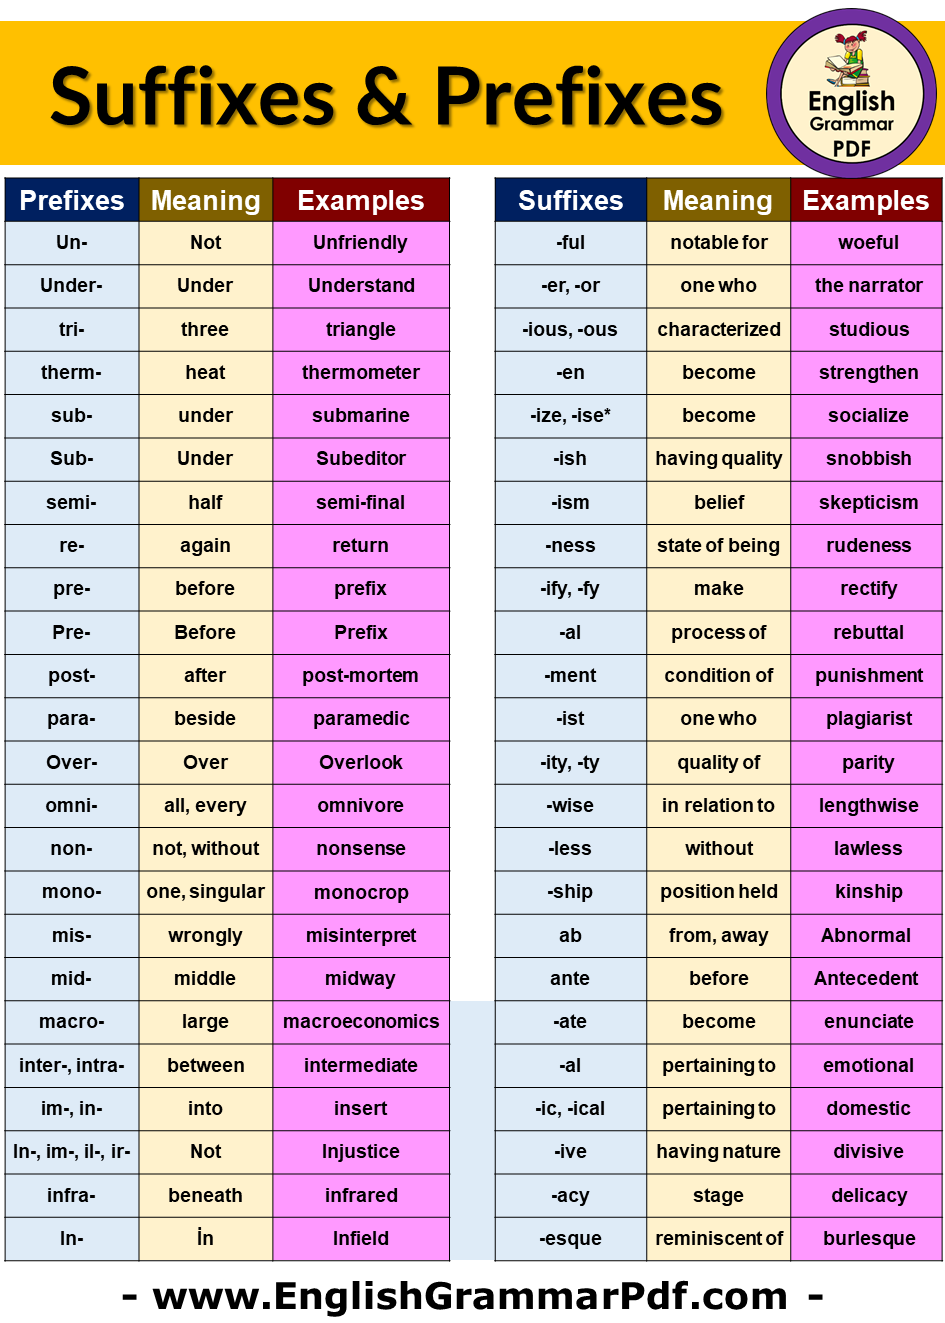 80 Examples Of Prefixes And Suffixes Used In Sentences English Grammar Pdf 7120